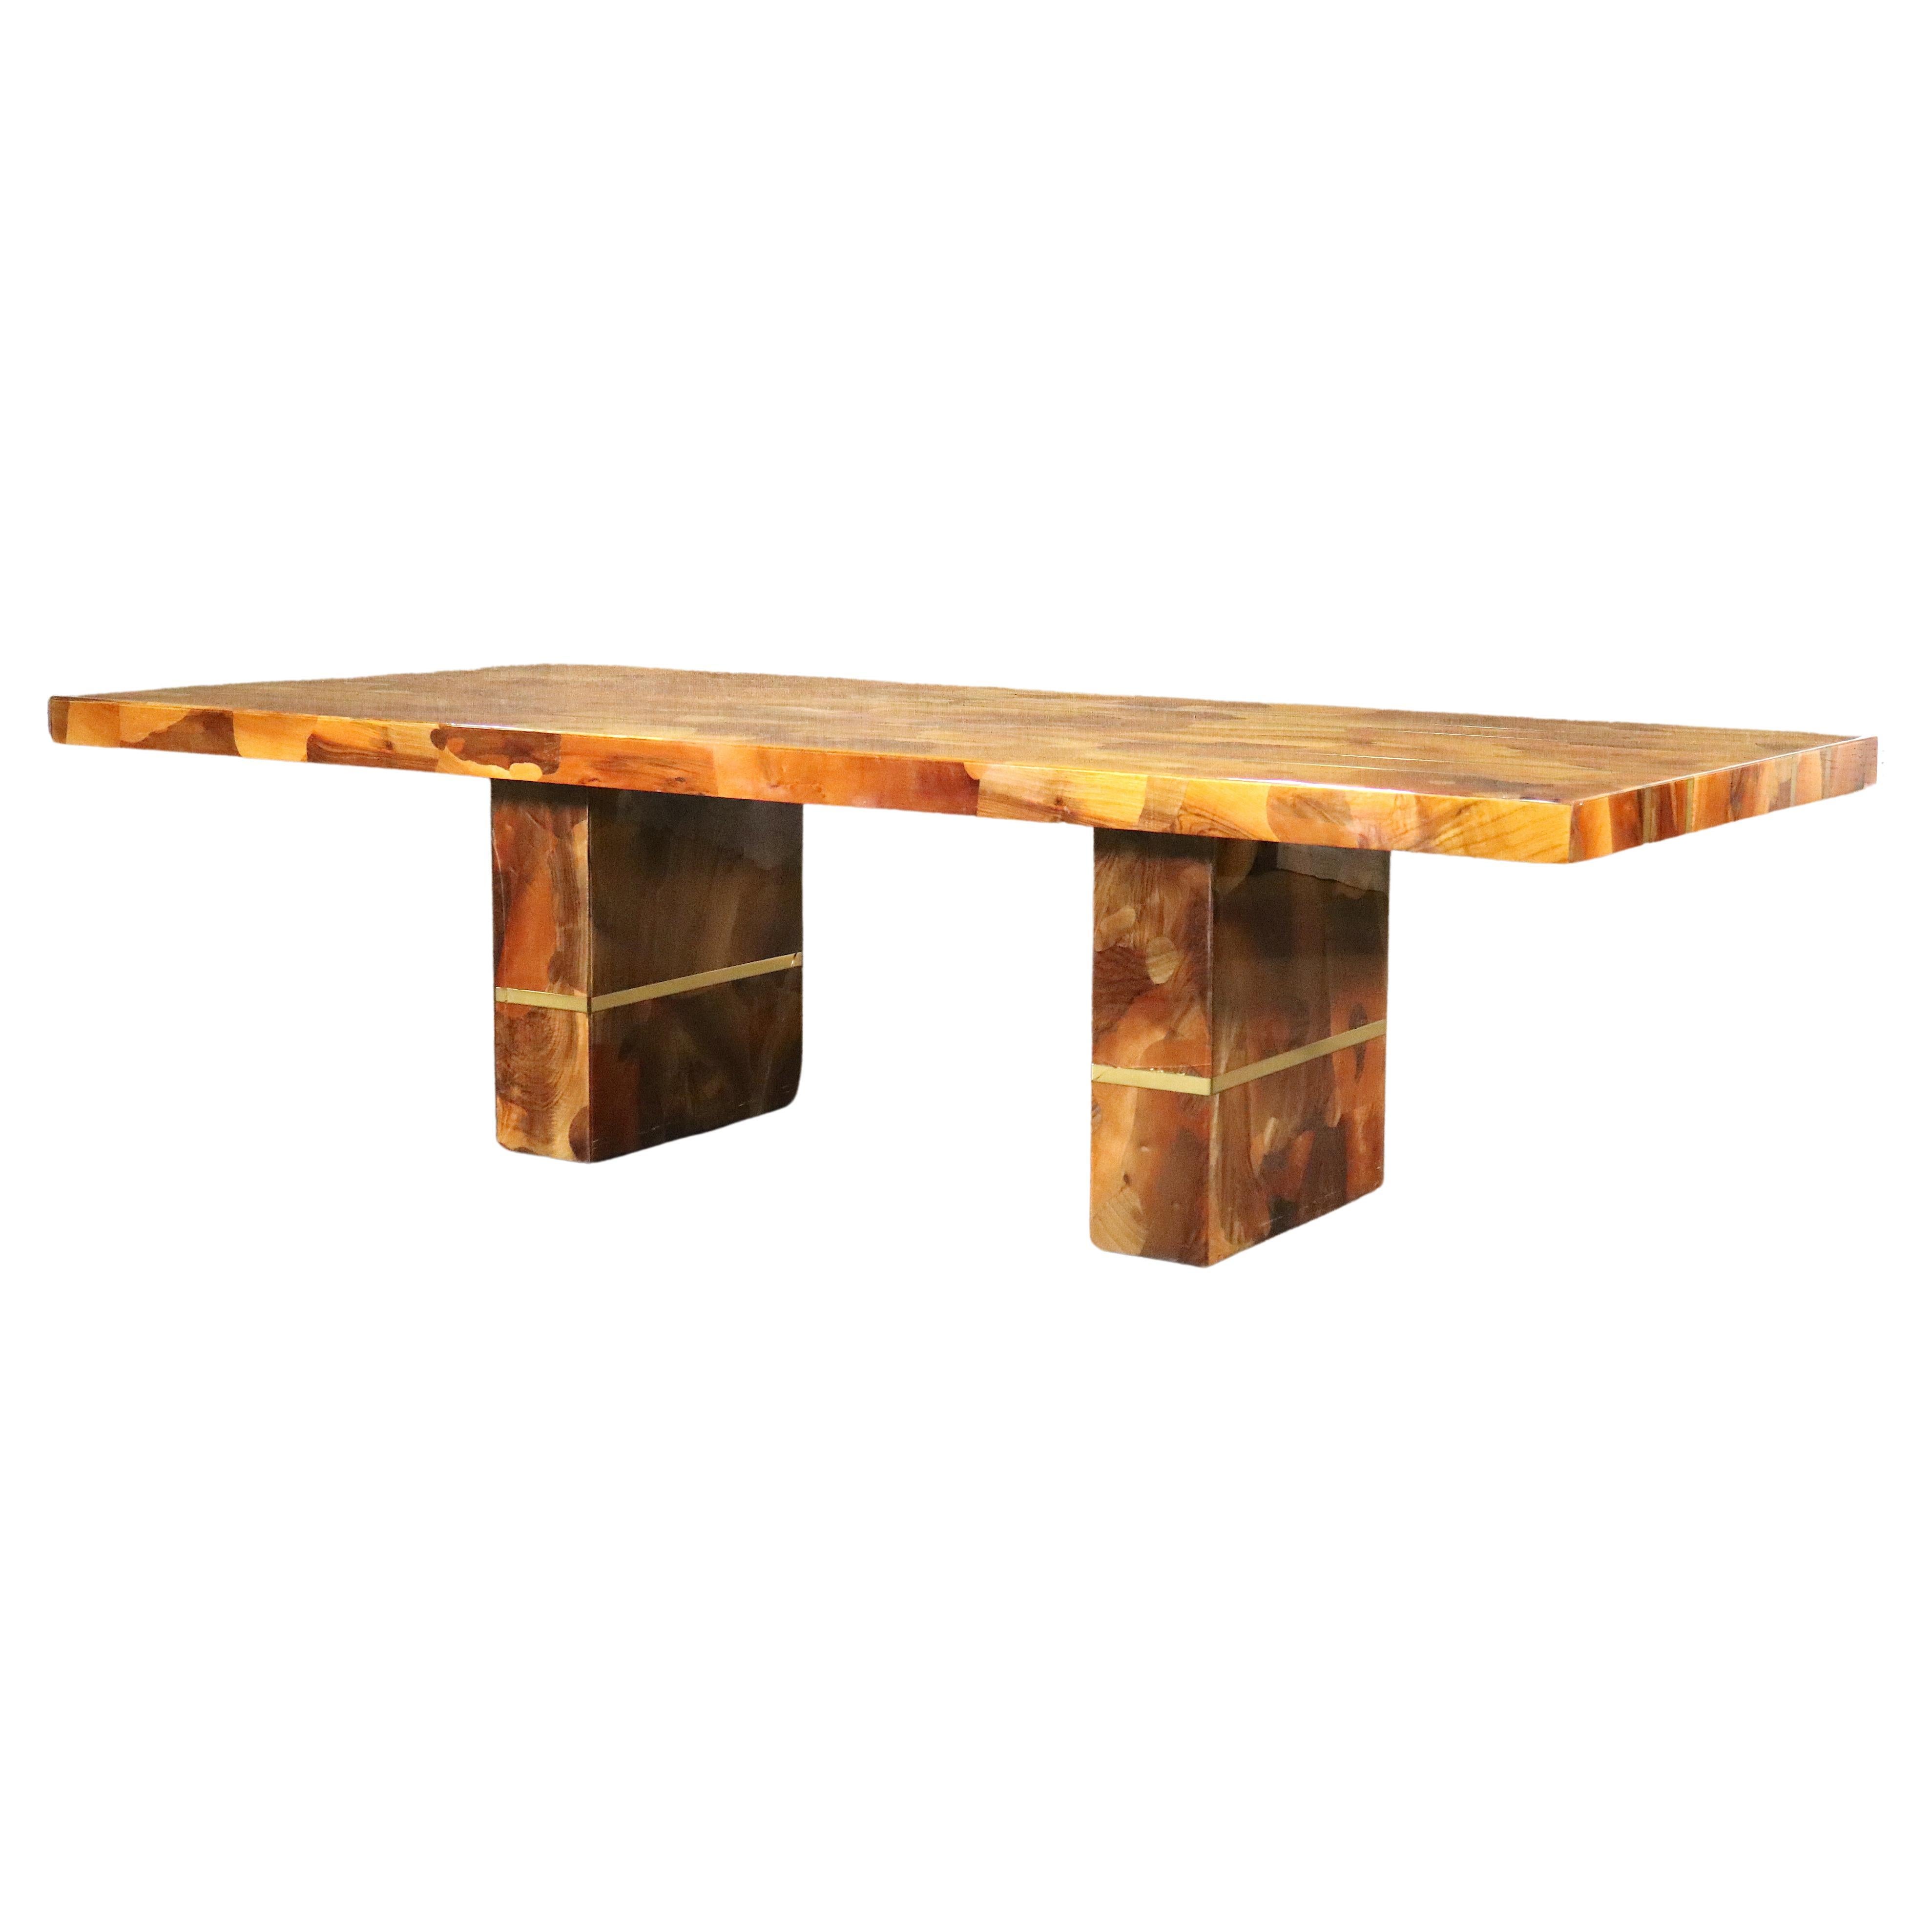 This Mid-Century Modern styled wood dining table sports a brass inlay and gorgeous mosaic wood facade. Set on two strong pedestal legs that also have brass lines inlaid.

Please confirm pickup location, NY or NJ.